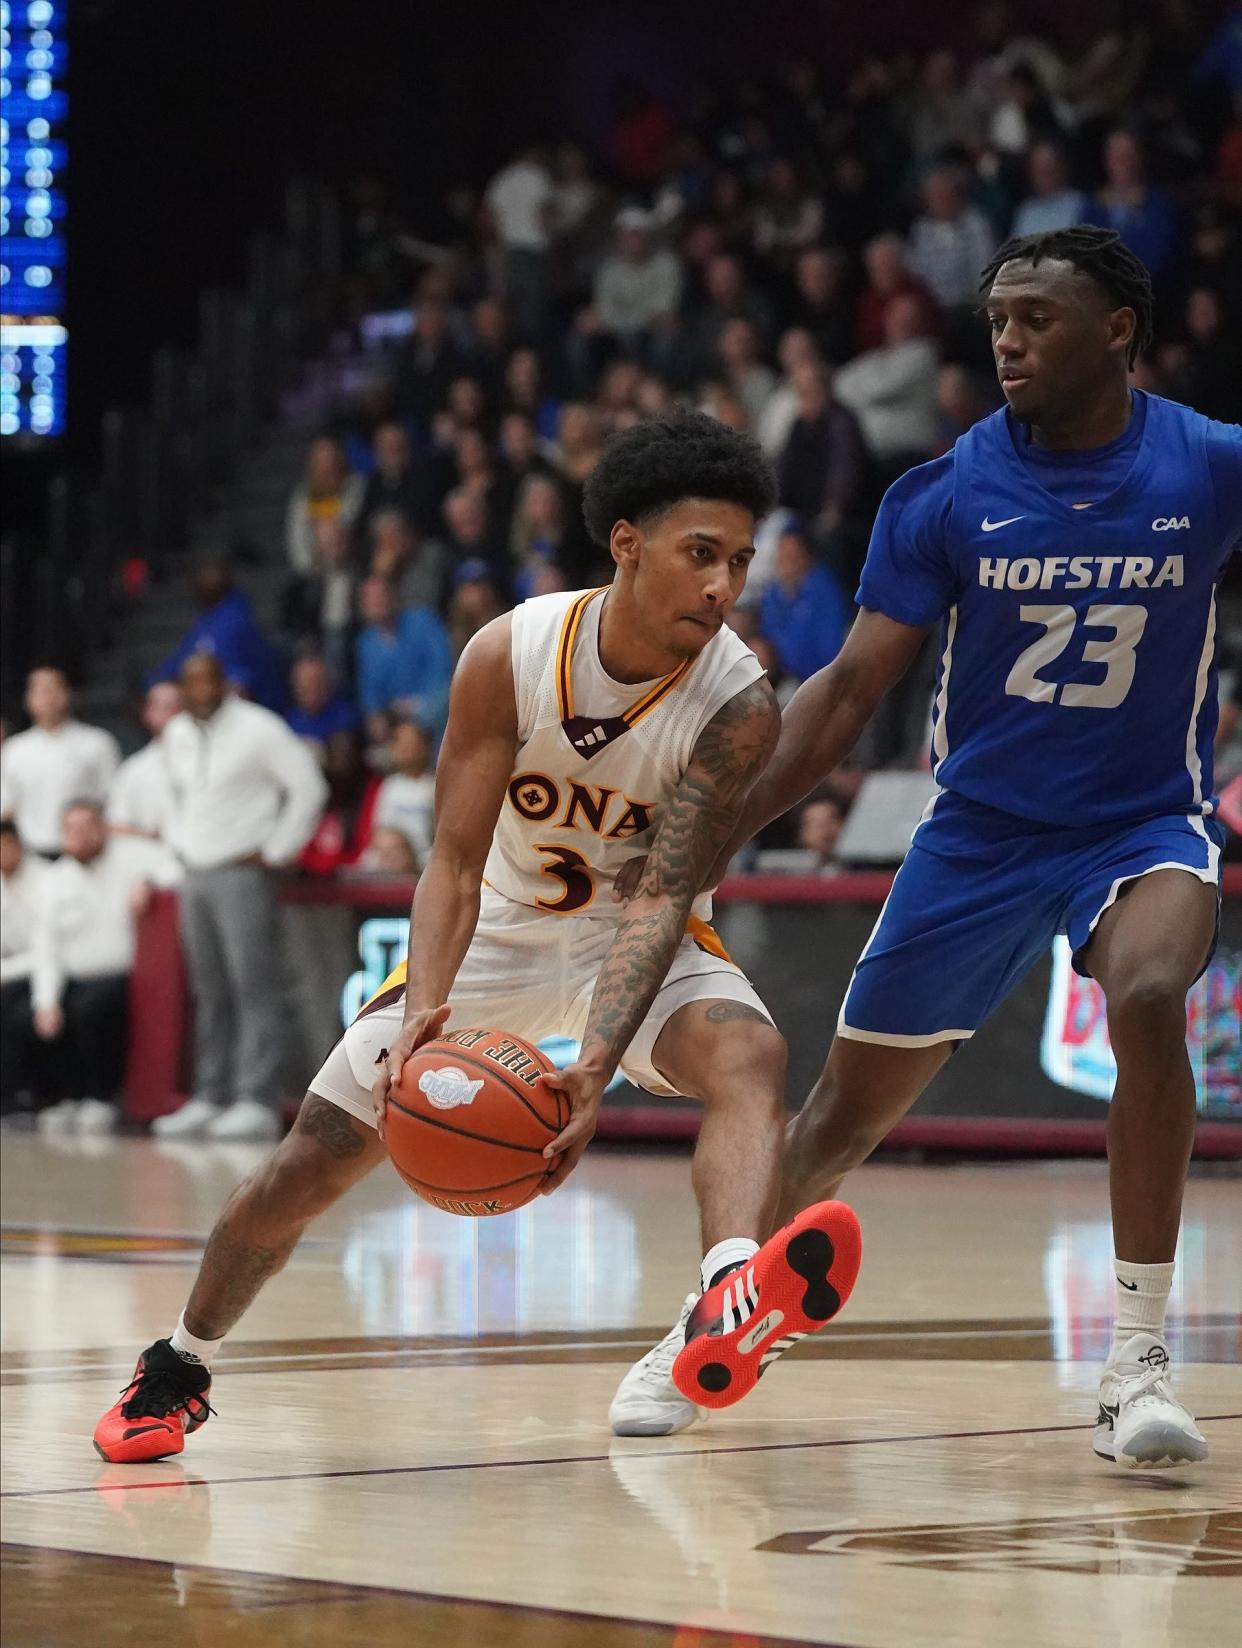 Iona guard Jeremiah Quigley (3) drives on Hofstra guard Tyler Thomas (23) during NCAA mens basketball action at Iona University in New Rochelle on Wednesday, Dec 6, 2023.